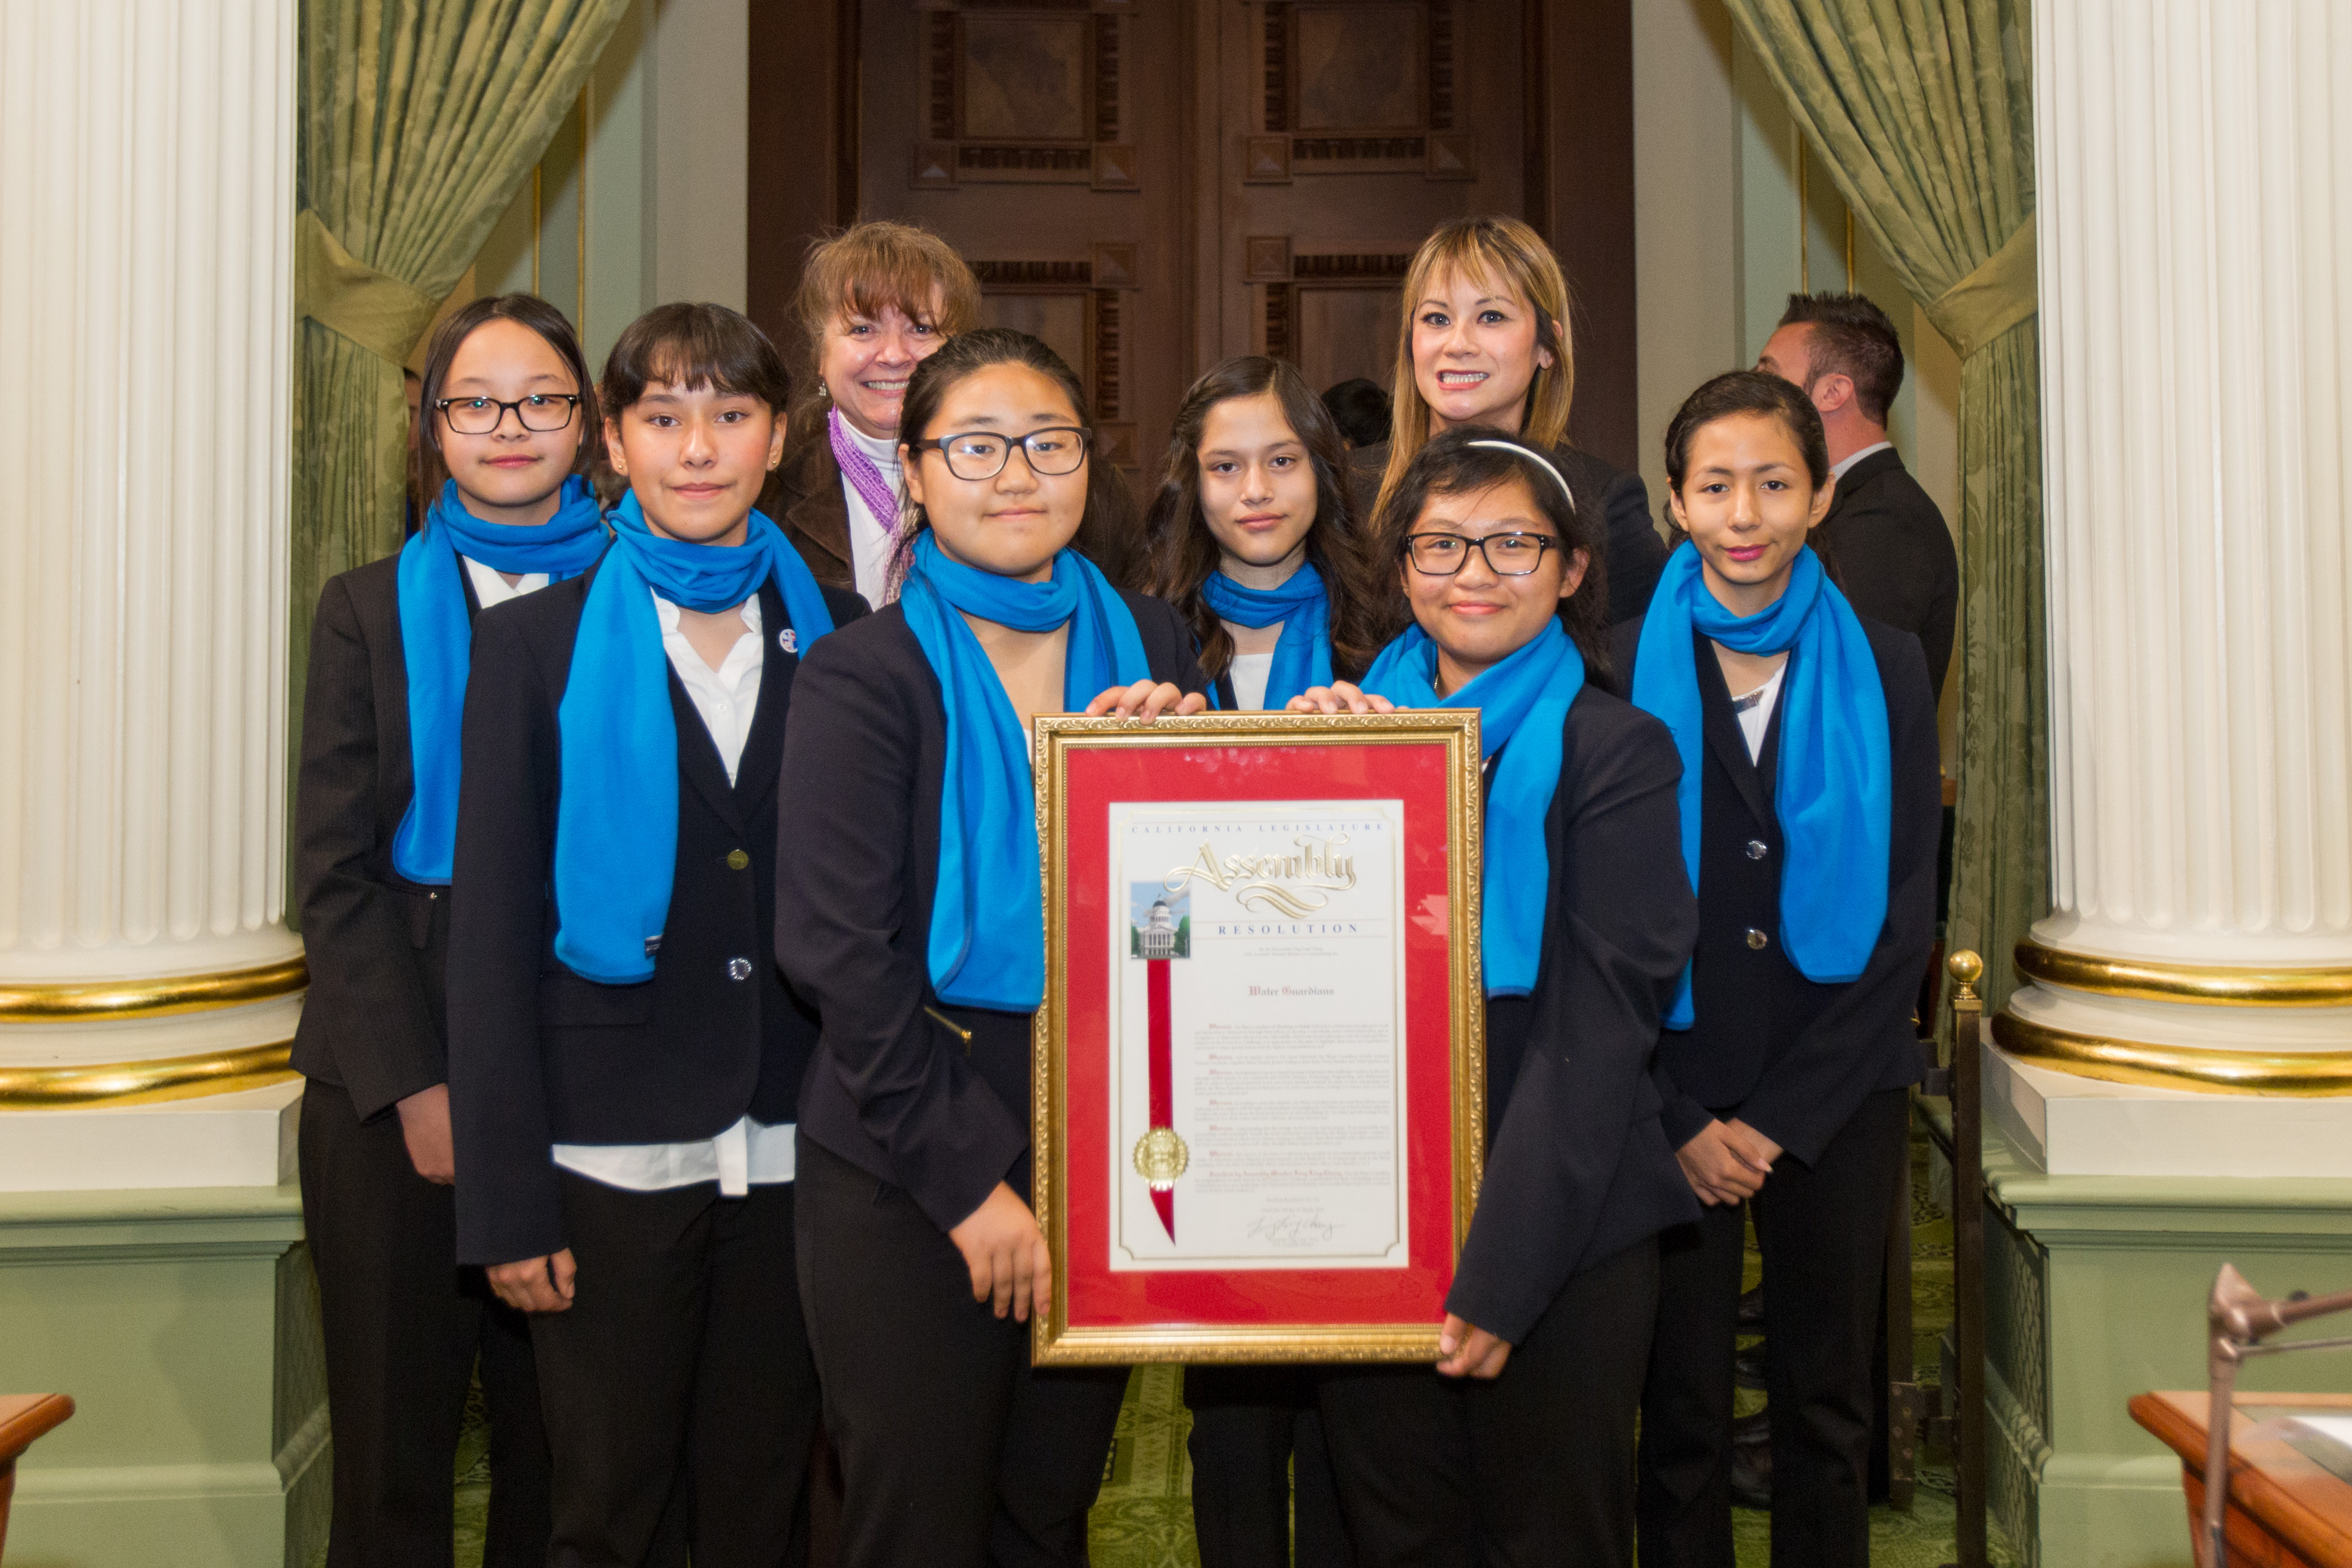 Students from Washington Middle School in La Habra being honored in Sacramento